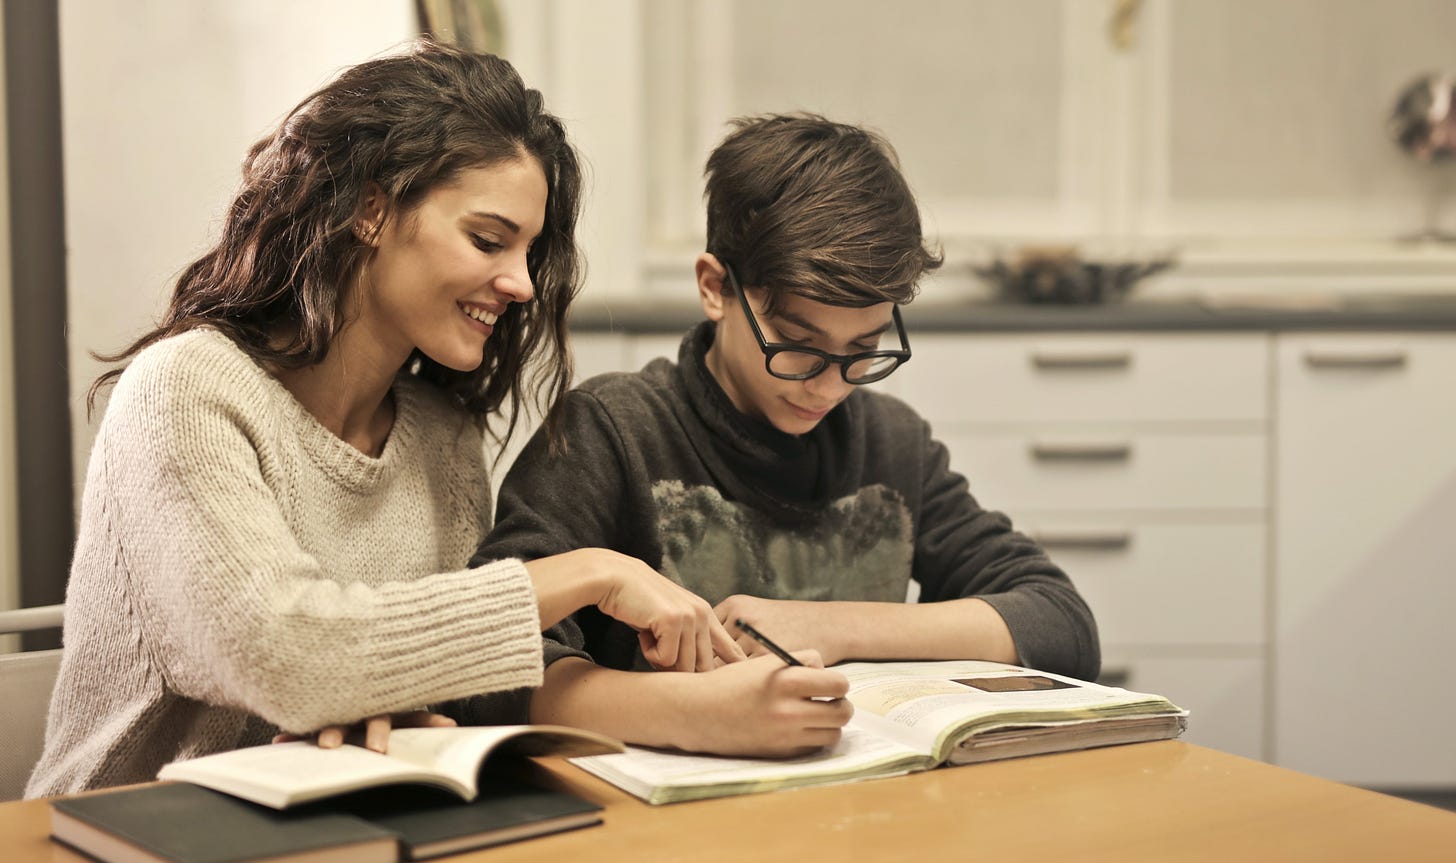 To siblings work on homework together. The older, a woman, is pointing out something to her younger brother.